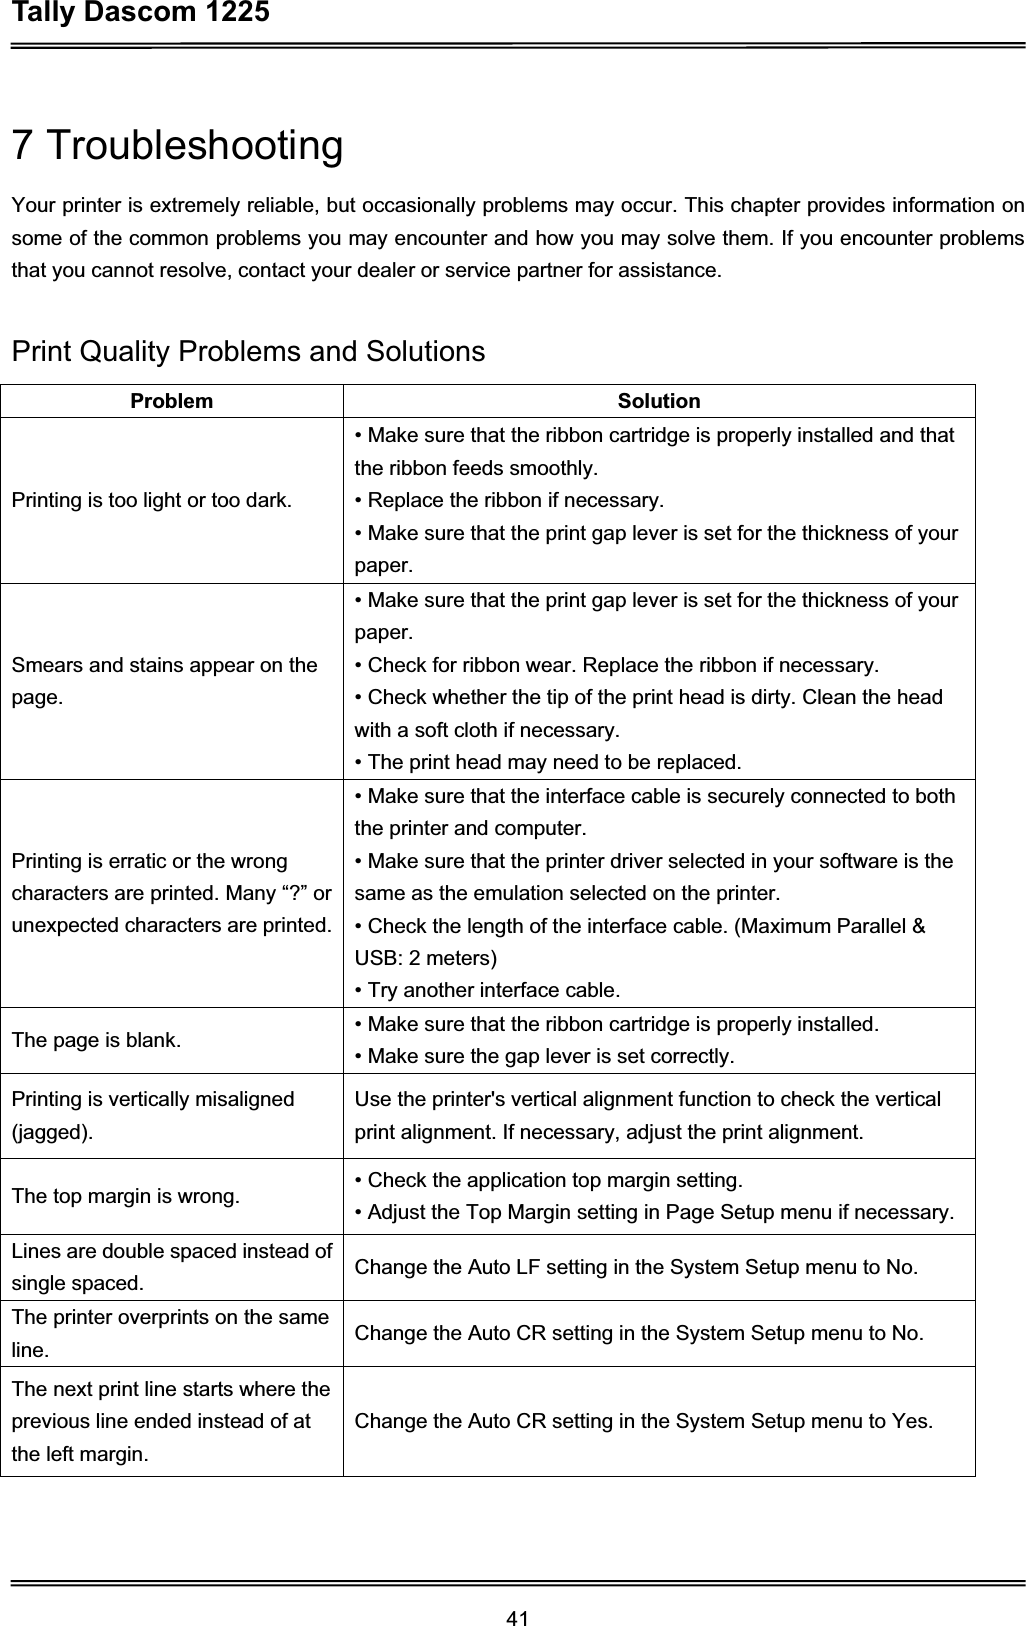 Tally Dascom 1225 417 Troubleshooting Your printer is extremely reliable, but occasionally problems may occur. This chapter provides information on some of the common problems you may encounter and how you may solve them. If you encounter problems that you cannot resolve, contact your dealer or service partner for assistance. Print Quality Problems and Solutions Problem SolutionPrinting is too light or too dark.   • Make sure that the ribbon cartridge is properly installed and that the ribbon feeds smoothly. • Replace the ribbon if necessary.     • Make sure that the print gap lever is set for the thickness of your paper.  Smears and stains appear on the page.• Make sure that the print gap lever is set for the thickness of your paper.  • Check for ribbon wear. Replace the ribbon if necessary.   • Check whether the tip of the print head is dirty. Clean the head with a soft cloth if necessary.   • The print head may need to be replaced.   Printing is erratic or the wrong characters are printed. Many “?” or unexpected characters are printed.   • Make sure that the interface cable is securely connected to both the printer and computer.   • Make sure that the printer driver selected in your software is the same as the emulation selected on the printer. • Check the length of the interface cable. (Maximum Parallel &amp; USB: 2 meters) • Try another interface cable. The page is blank.    • Make sure that the ribbon cartridge is properly installed. • Make sure the gap lever is set correctly.   Printing is vertically misaligned (jagged).  Use the printer&apos;s vertical alignment function to check the vertical print alignment. If necessary, adjust the print alignment.   The top margin is wrong.    • Check the application top margin setting. • Adjust the Top Margin setting in Page Setup menu if necessary. Lines are double spaced instead of single spaced.    Change the Auto LF setting in the System Setup menu to No.   The printer overprints on the same line. Change the Auto CR setting in the System Setup menu to No. The next print line starts where the previous line ended instead of at the left margin.   Change the Auto CR setting in the System Setup menu to Yes. 